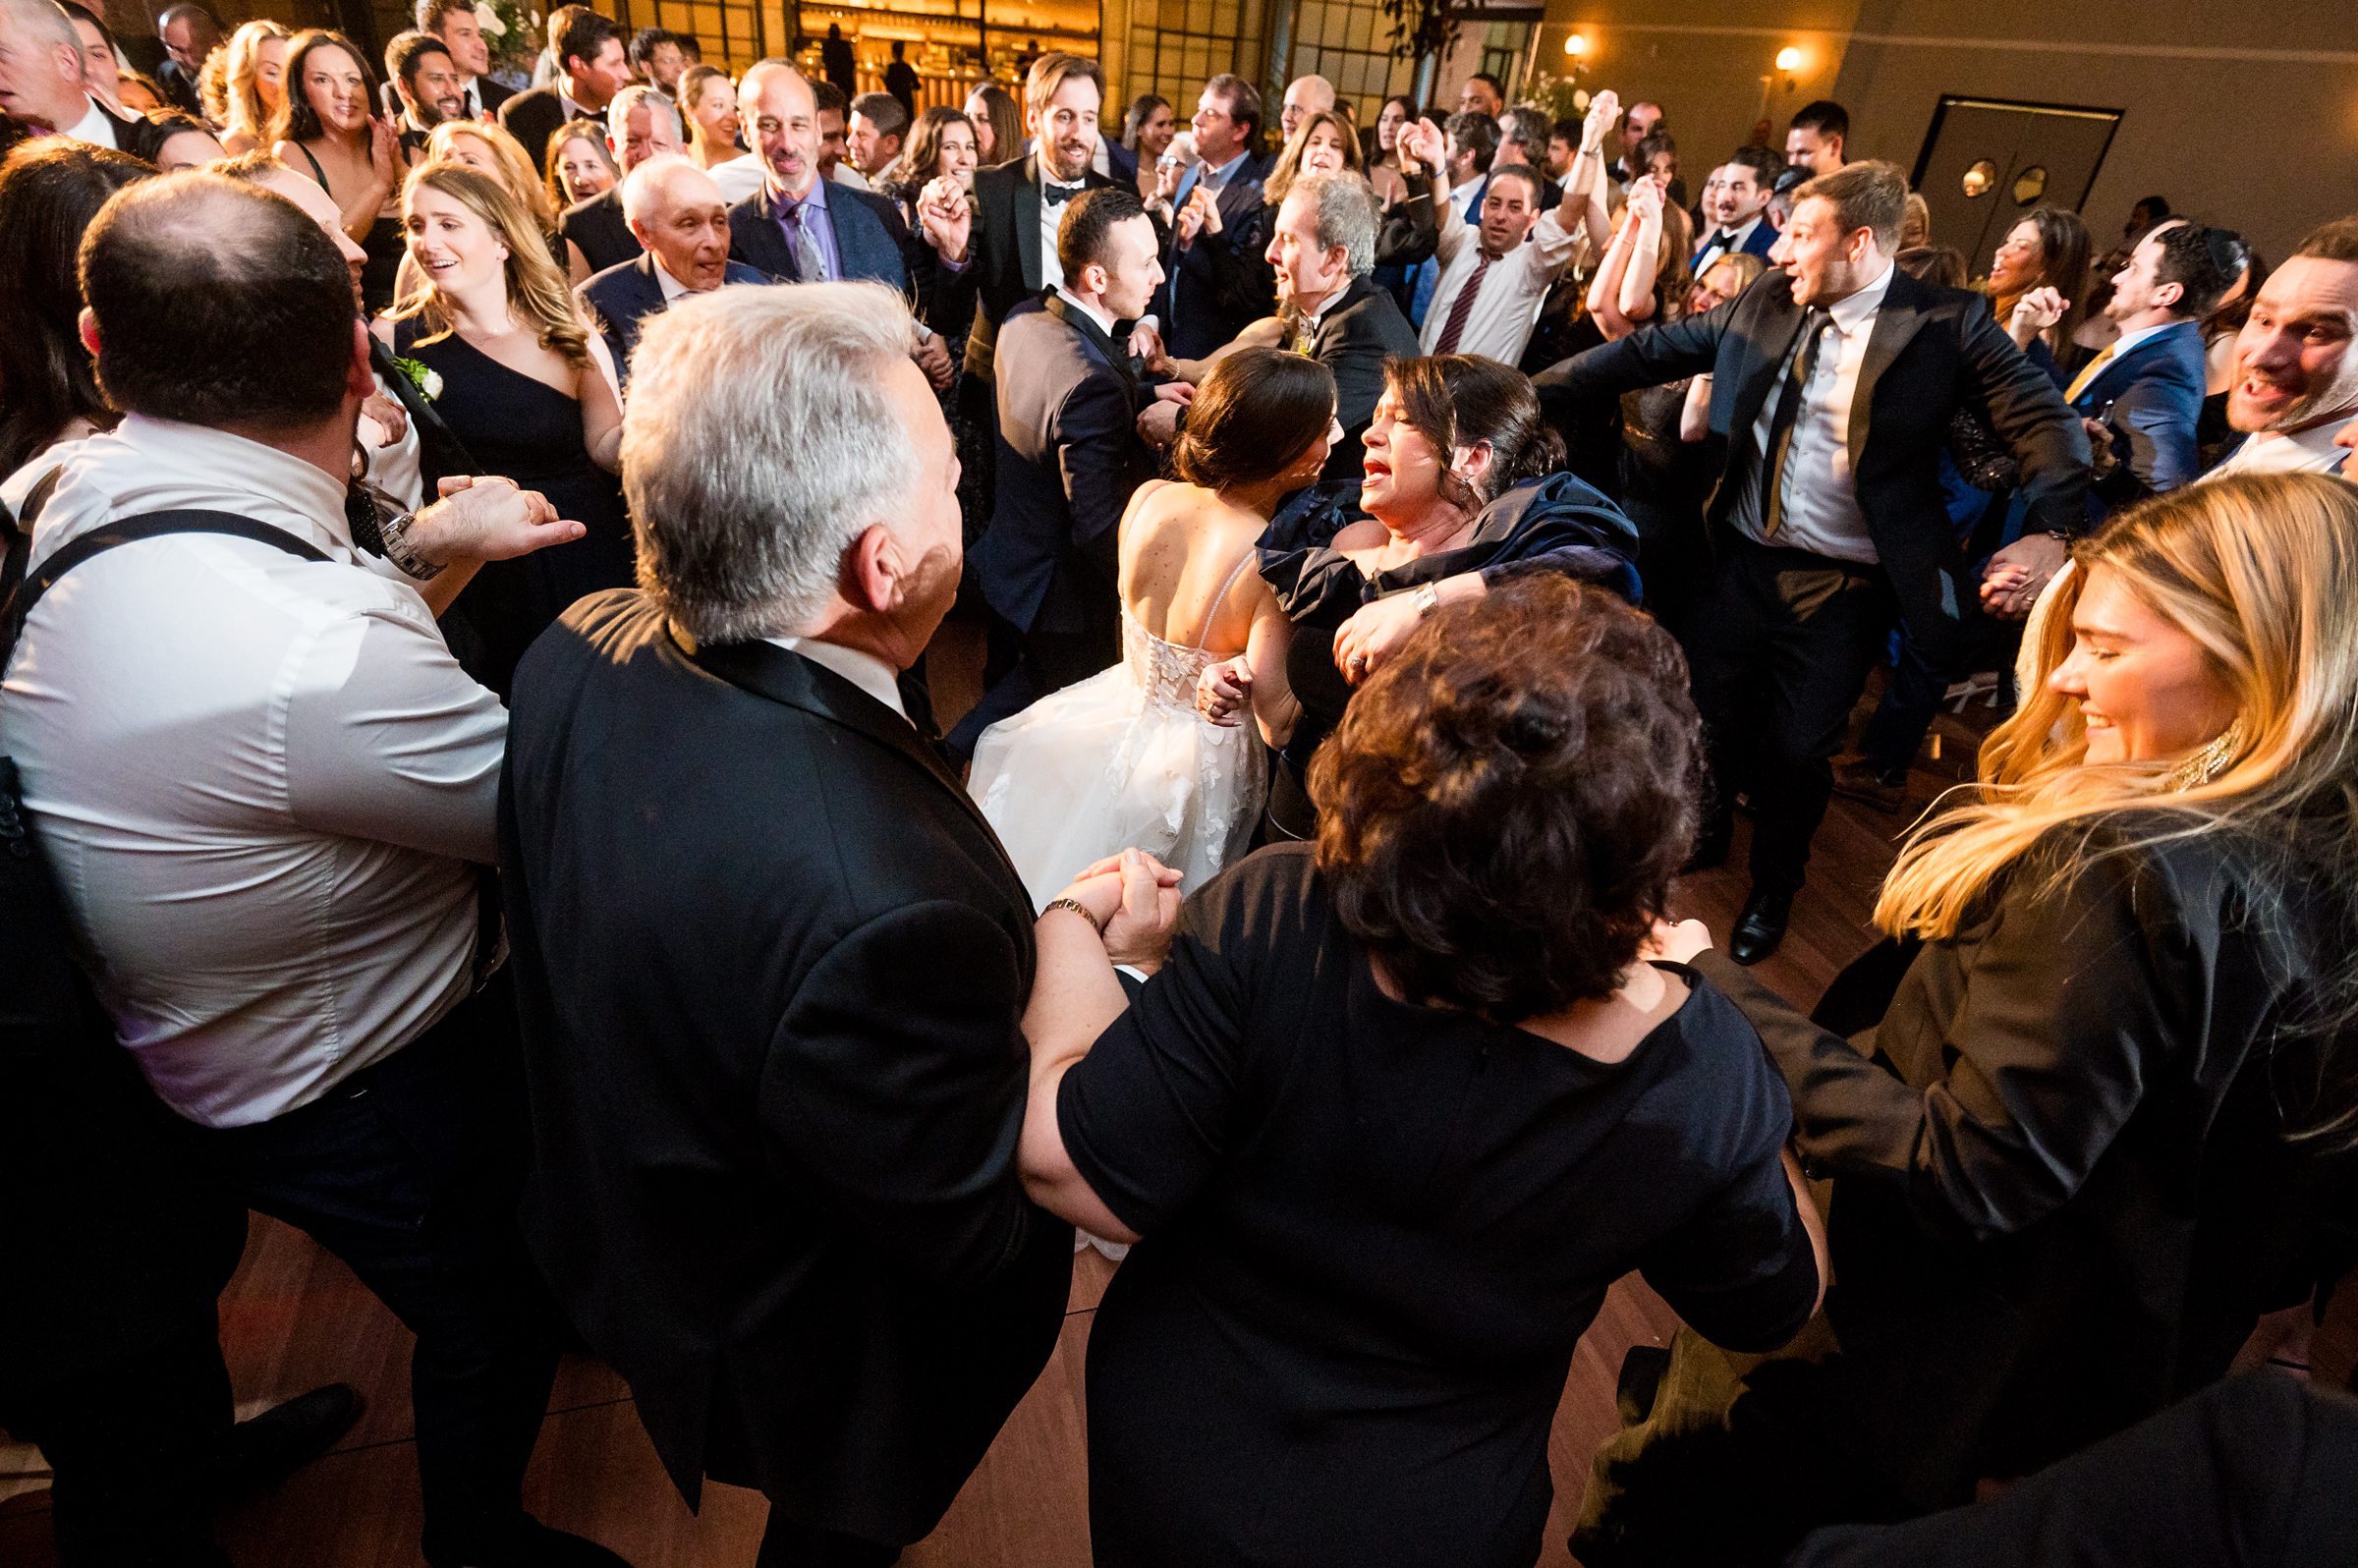 Attendees at a Lilah Events wedding reception dance joyfully.